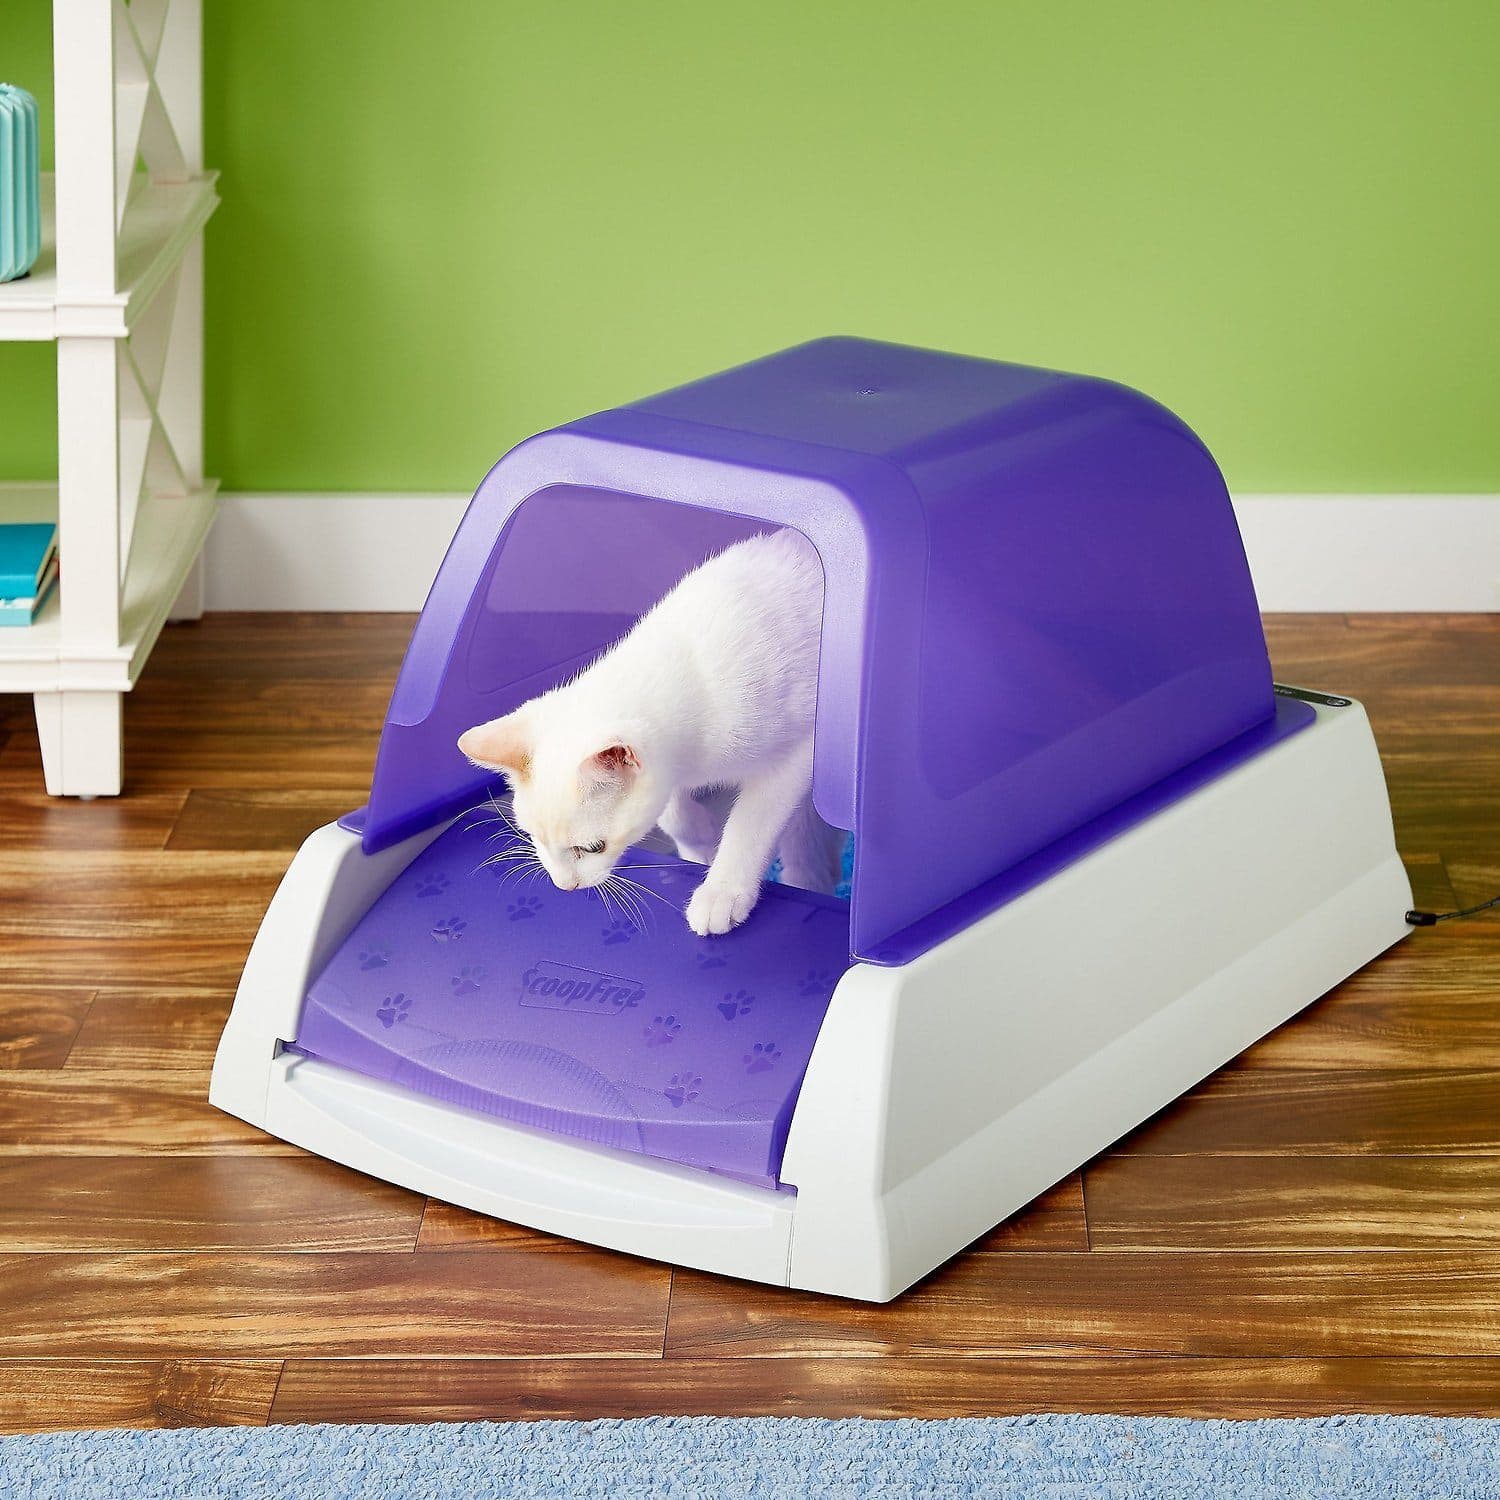 How to Keep Cat Litter from Tracking: 10 Steps (with Pictures)